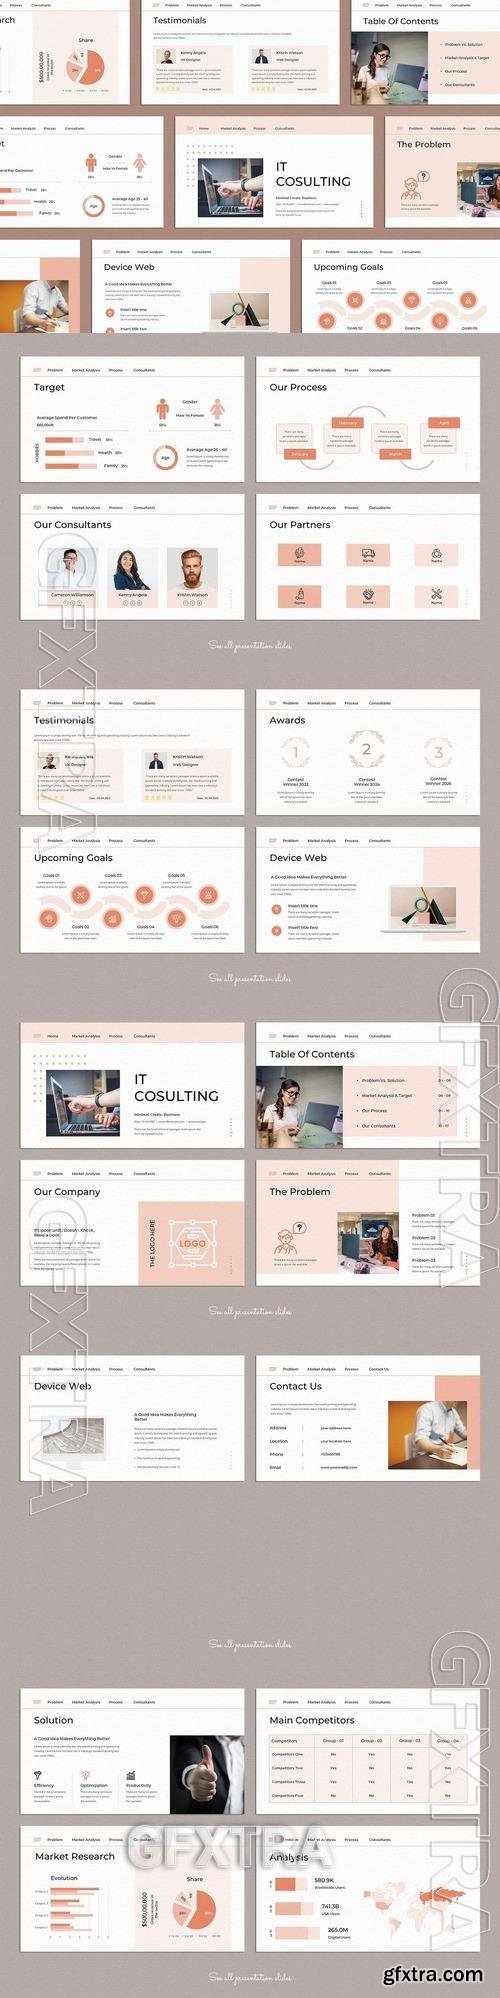 IT Consulting PowerPoint Presentation Template 2FJLUV7